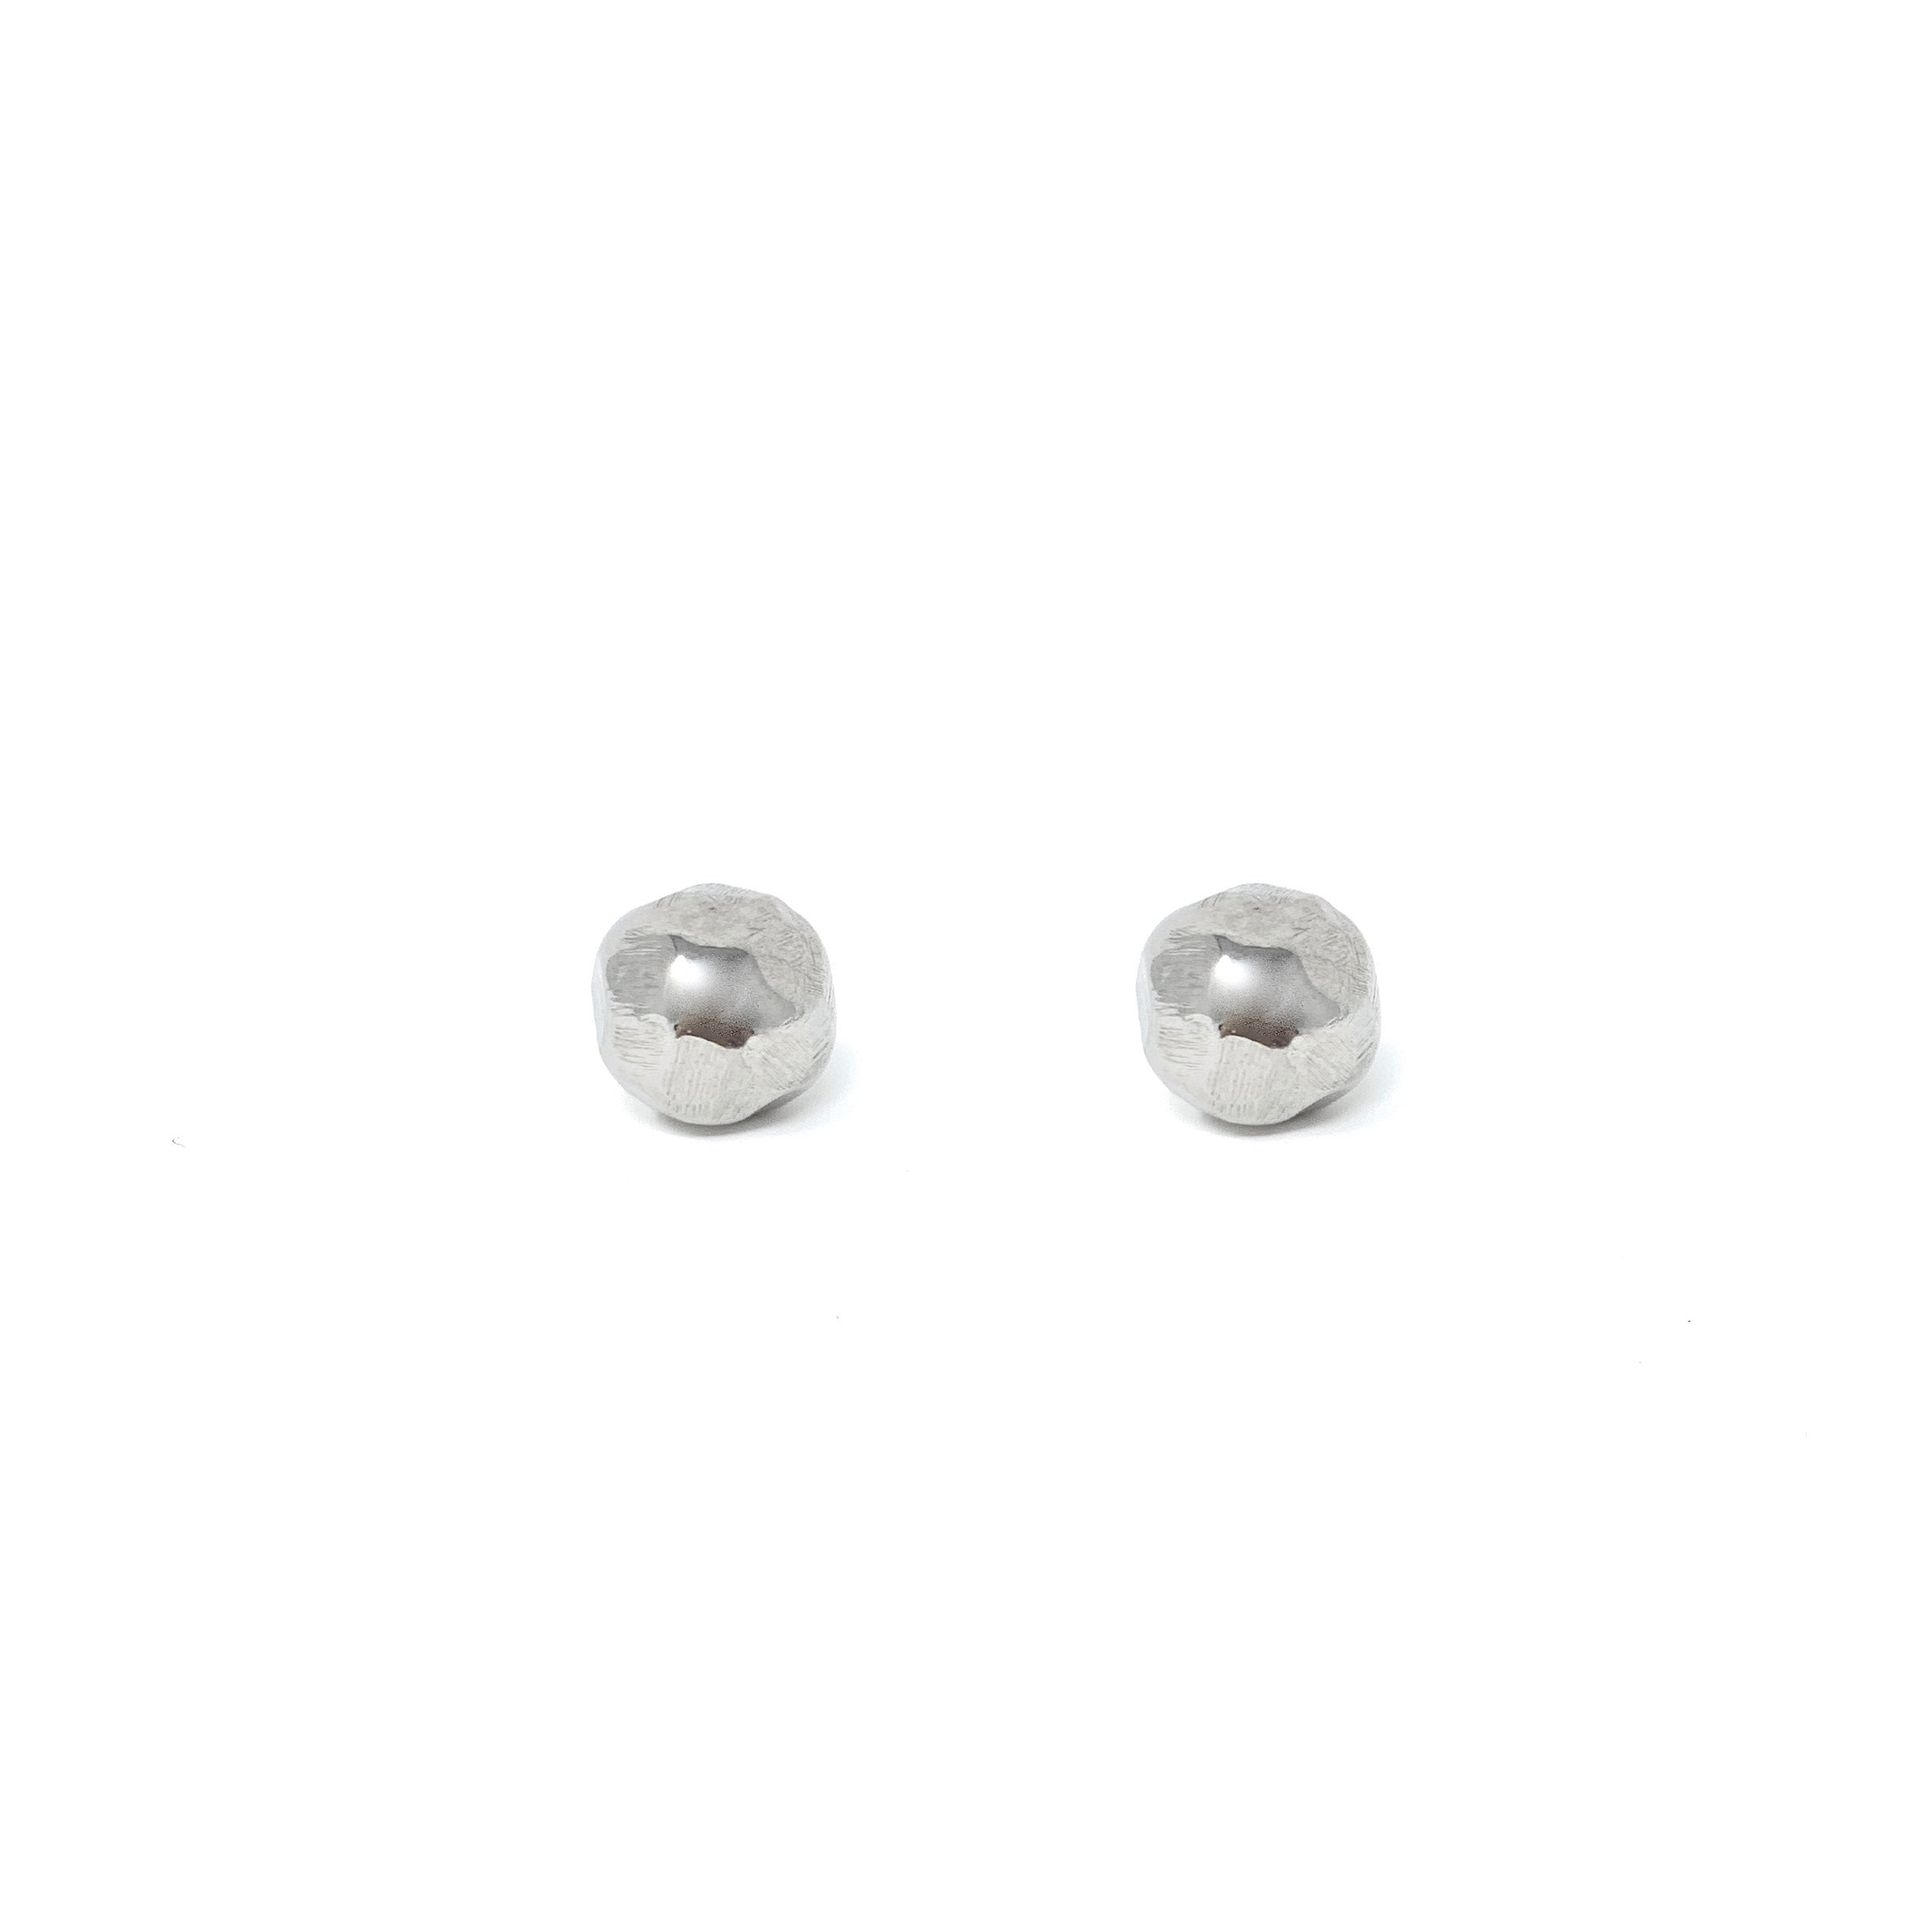 Hammered Beads Stud Earrings in Silver